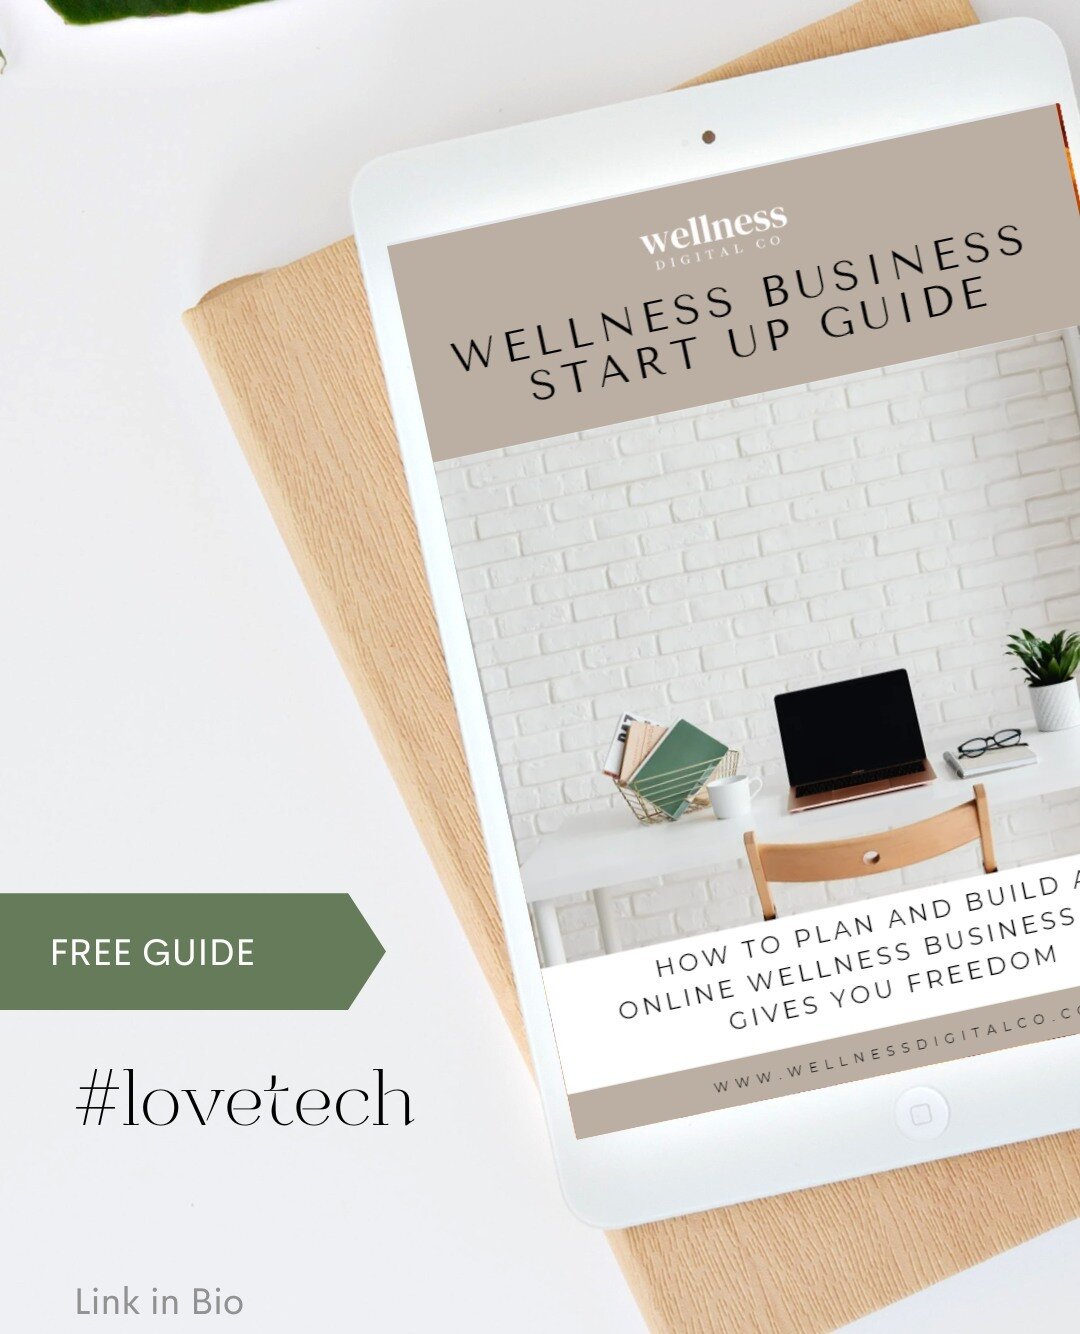 Click on the Link in my Bio to get access to my free Start Up Guide for Wellness Businesses. Featuring all the technology considerations to get you started, including a Vision Board Template and Goal Planning.⁠